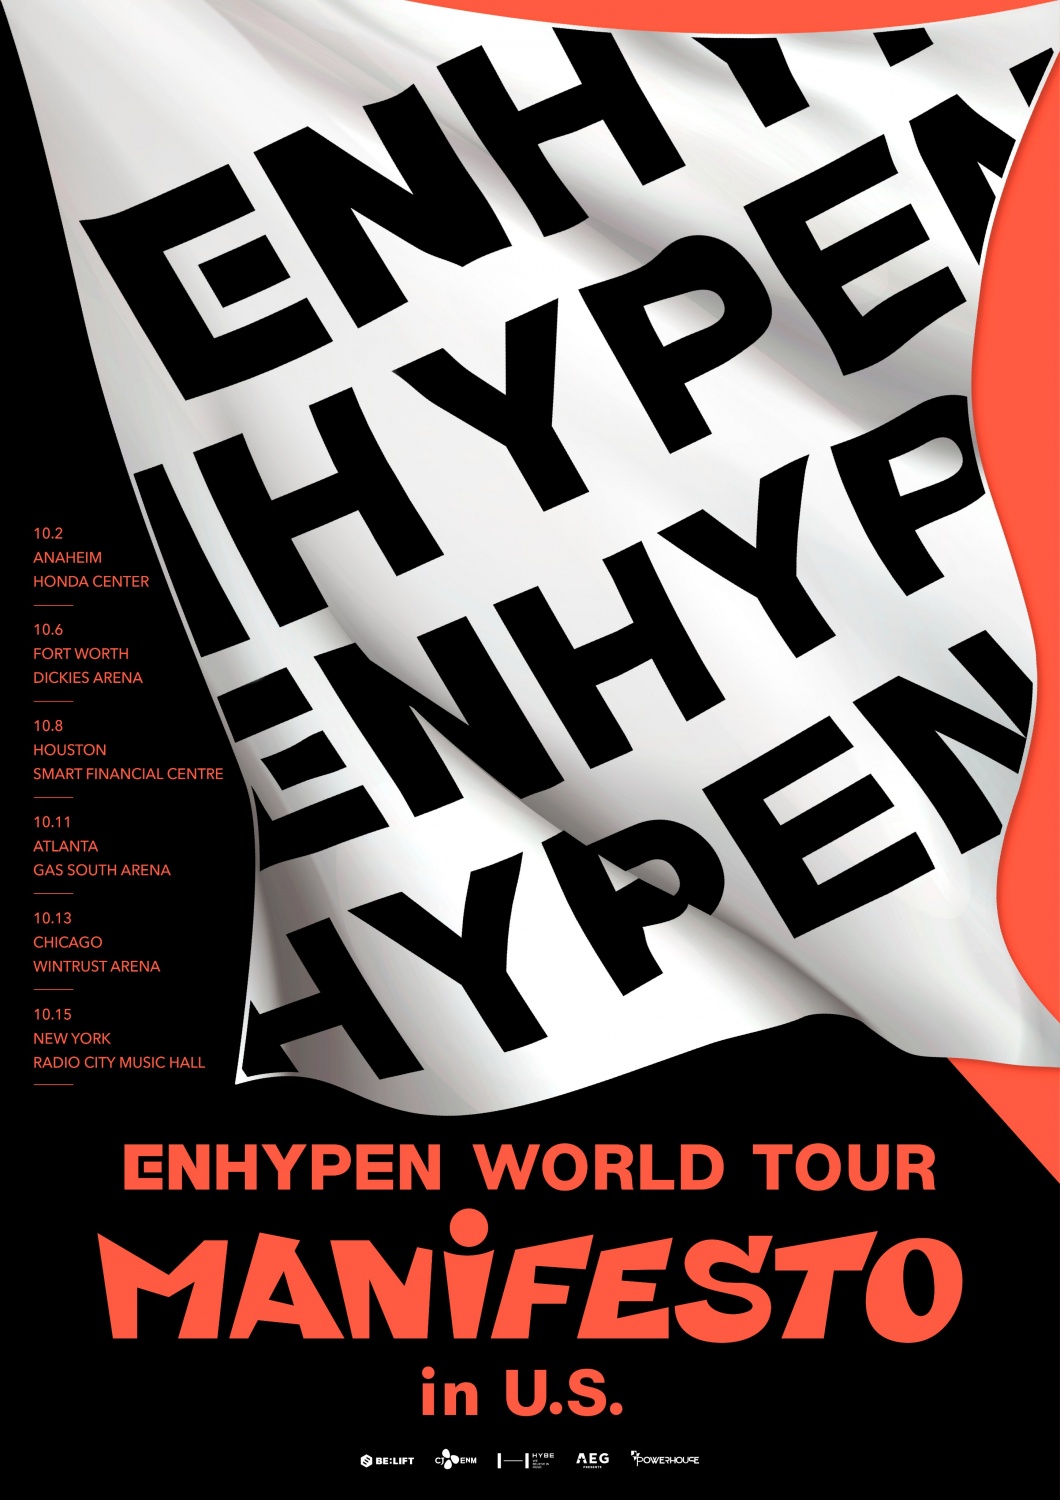 ENHYPEN opens its first world tour 'MANIFESTO' poster... determined eyes